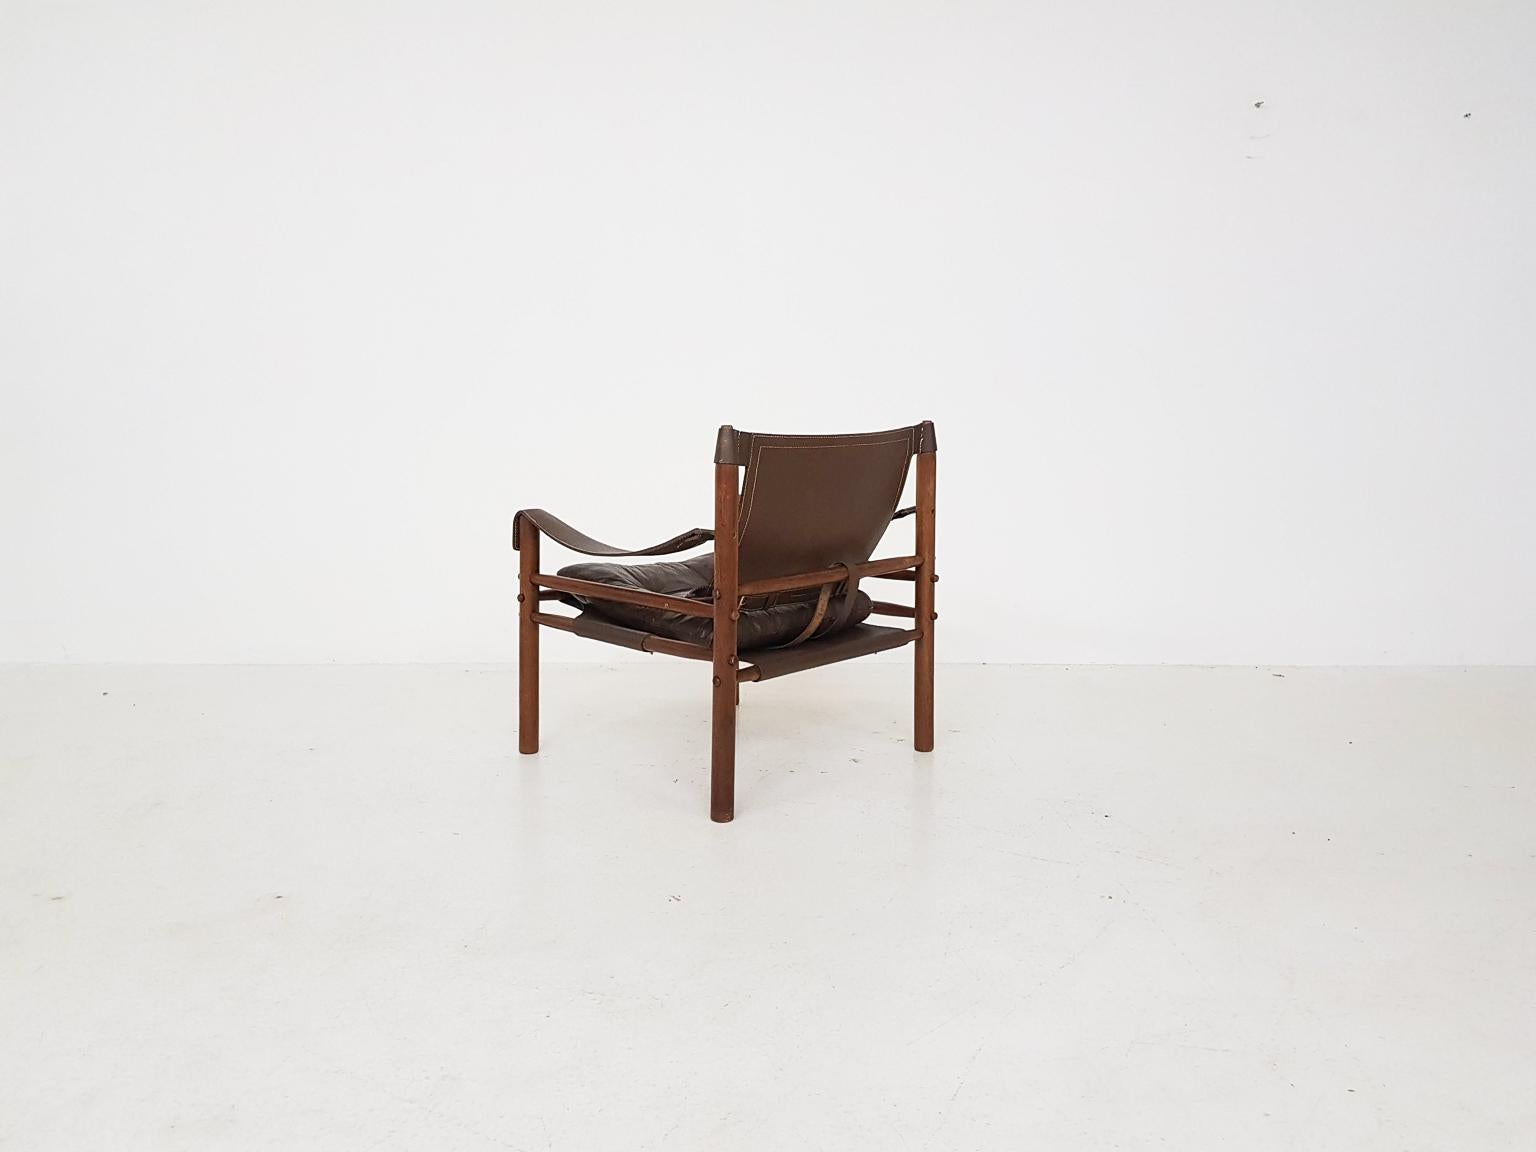 This safari Sirocco arm or lounge chair was designed in 1966 by the Swedish designer Arne Norell and produced by Scanform Colombia, which was a company making Norell furniture for America. Many of the Scanform edition chairs were exported to the USA